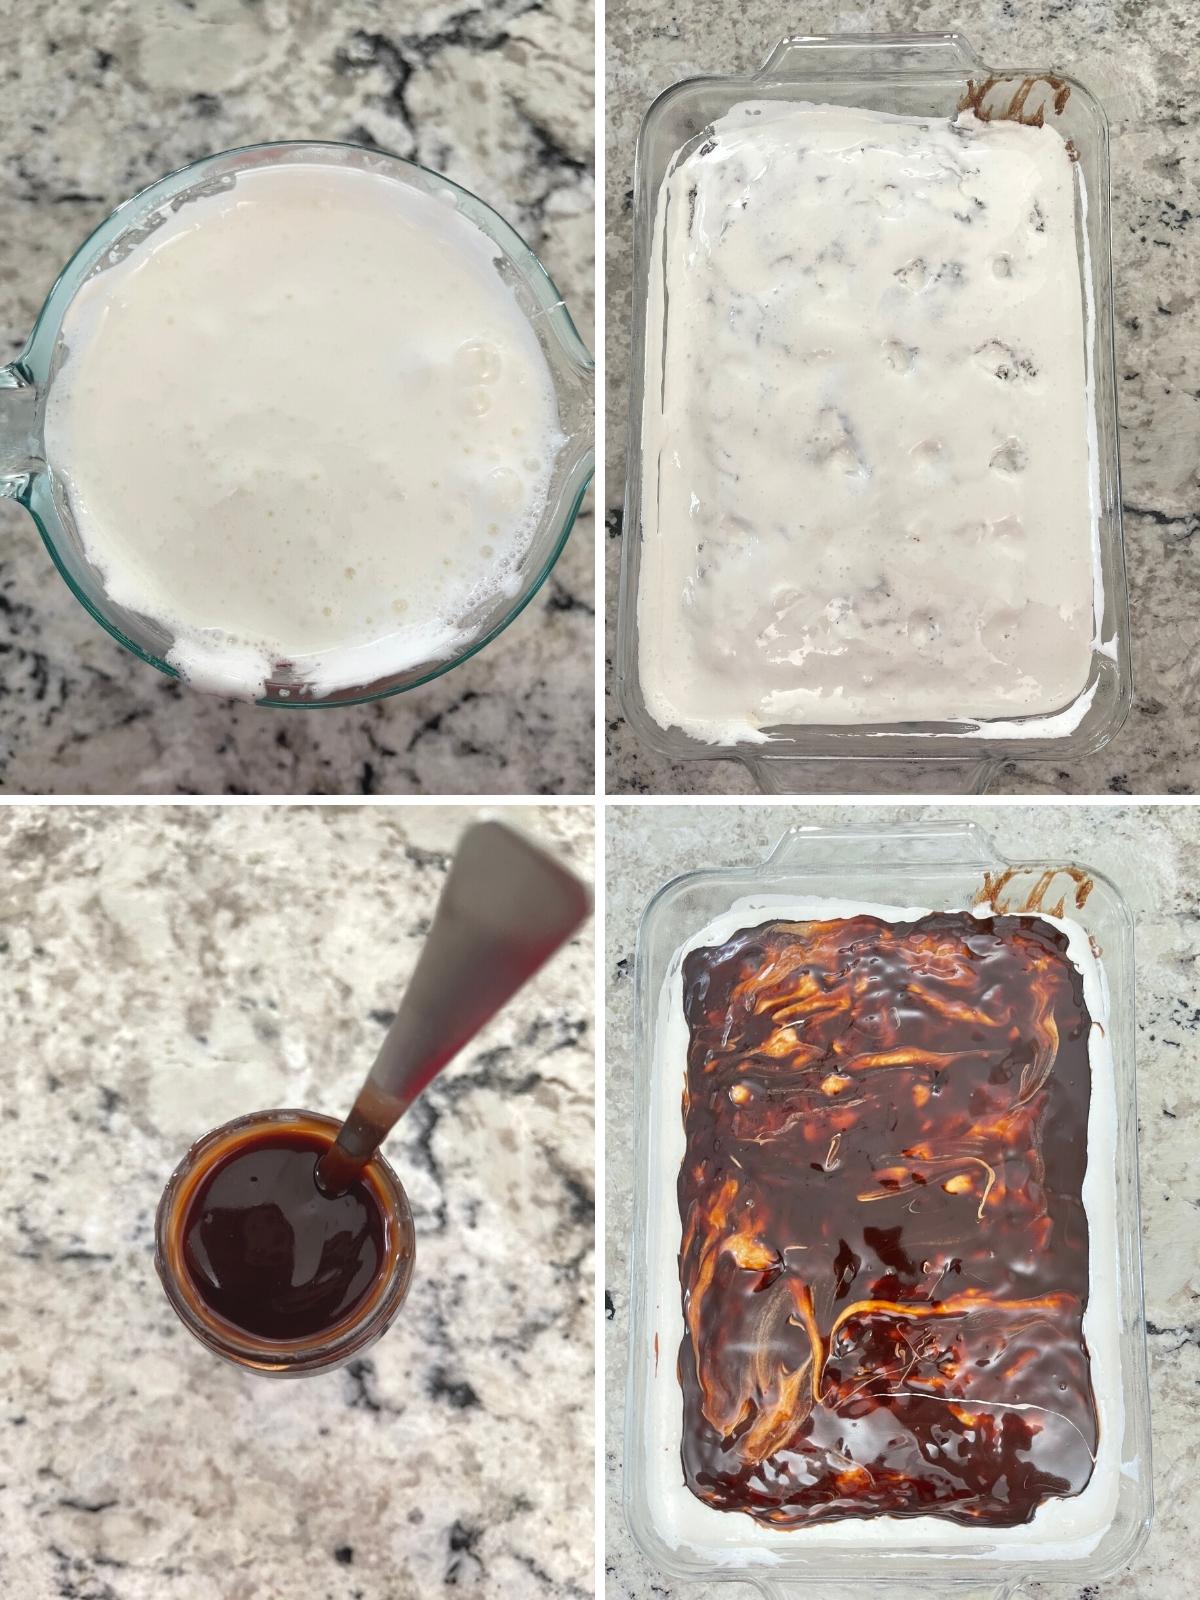 Images showing steps to make marshmallow and fudge layers.